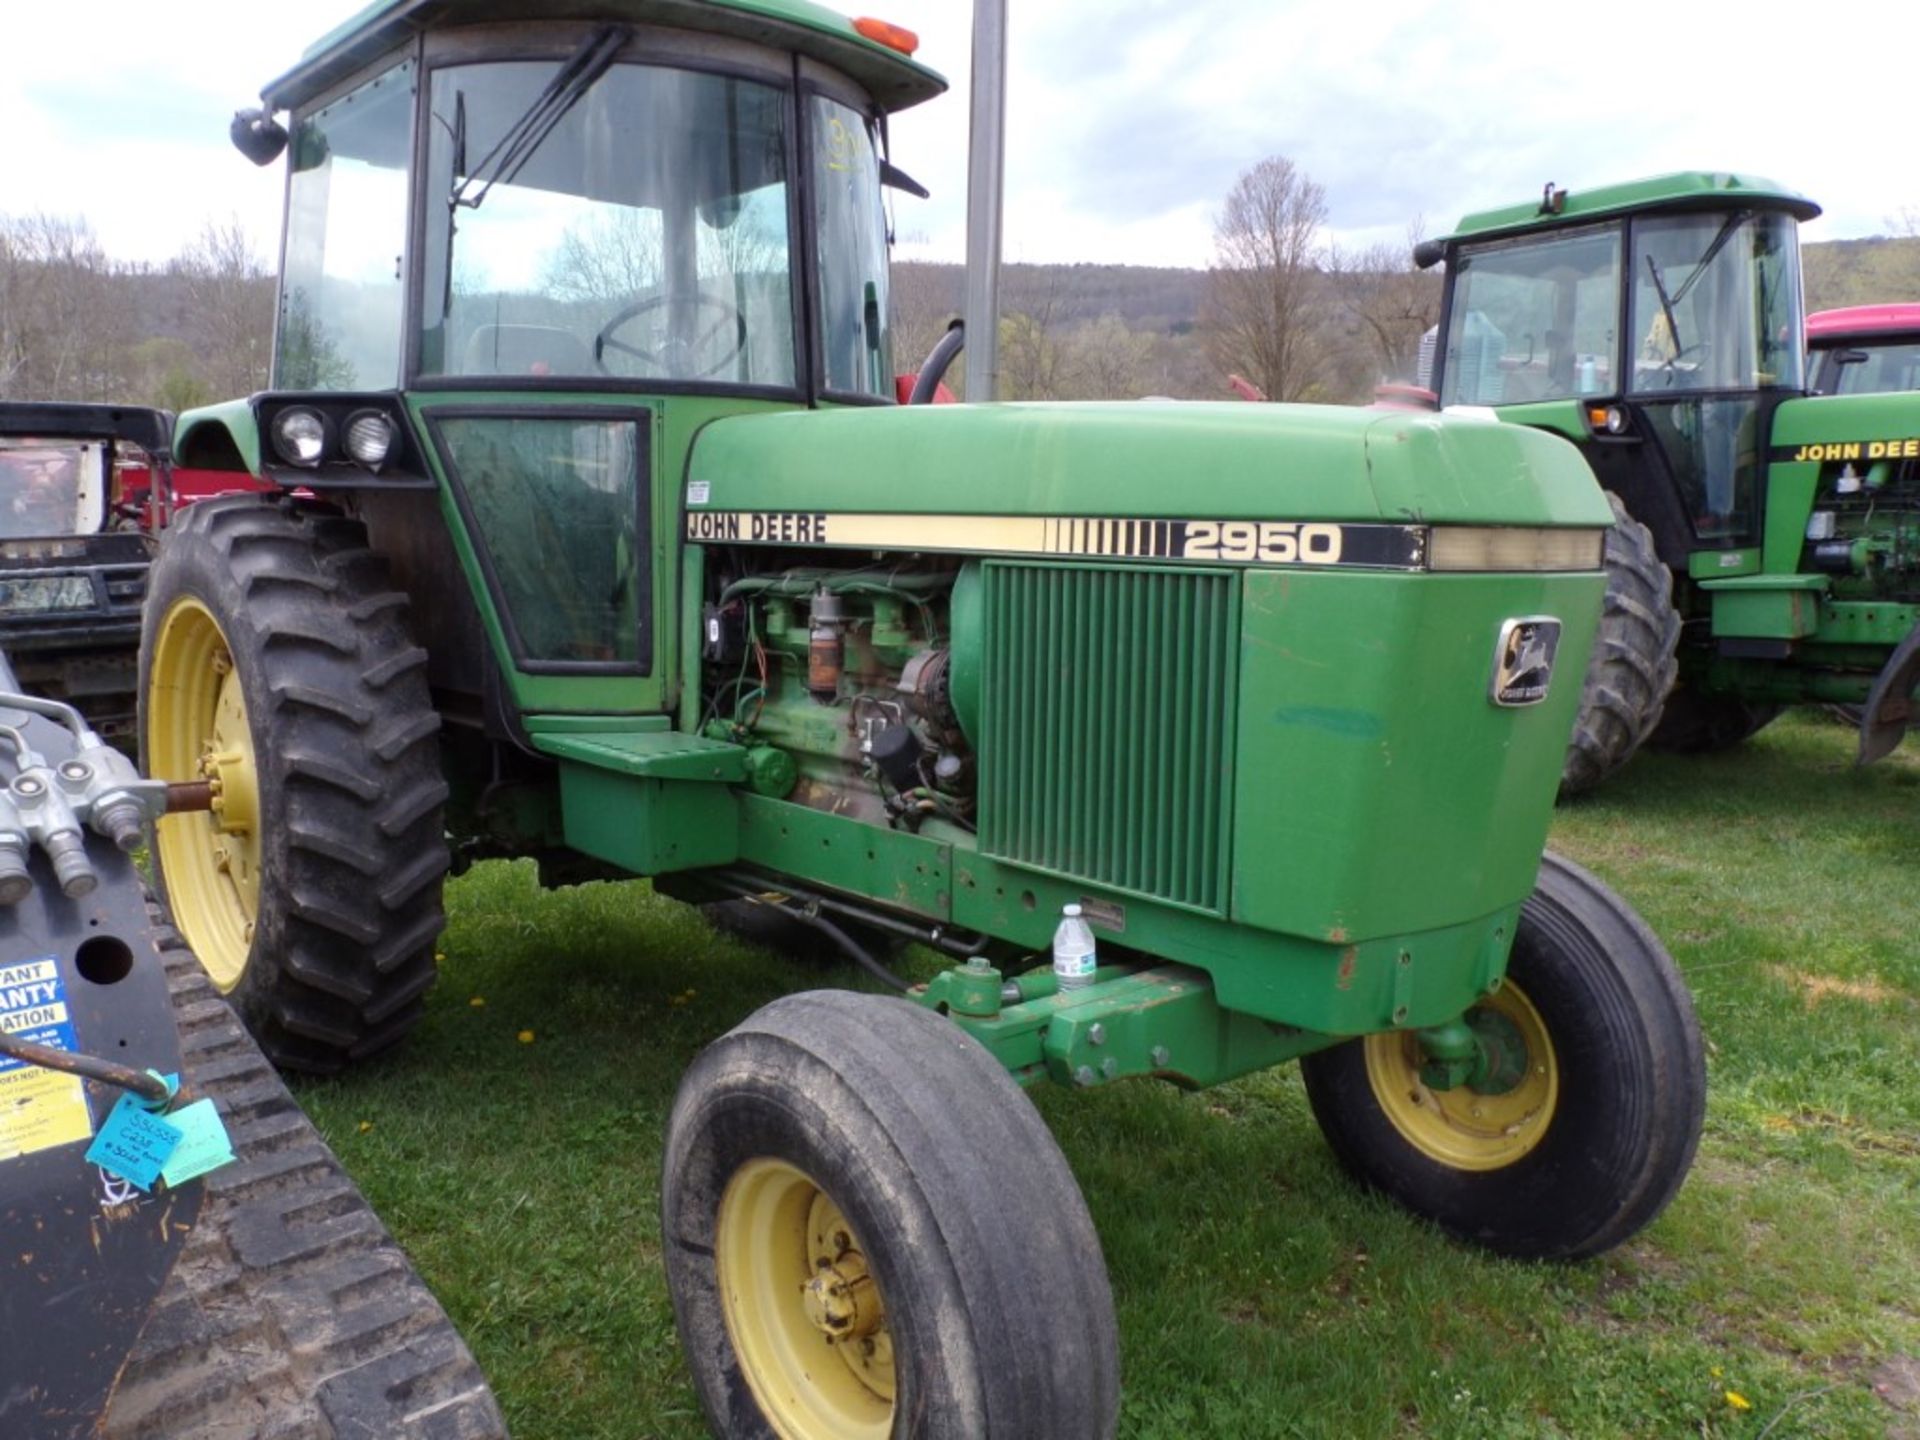 John Seere 2950 2 WD Full Cab, PtO, 3 PT Hitch, Dual Remotes, 3741 Hrs., Good Rubber (5335) - Image 3 of 4